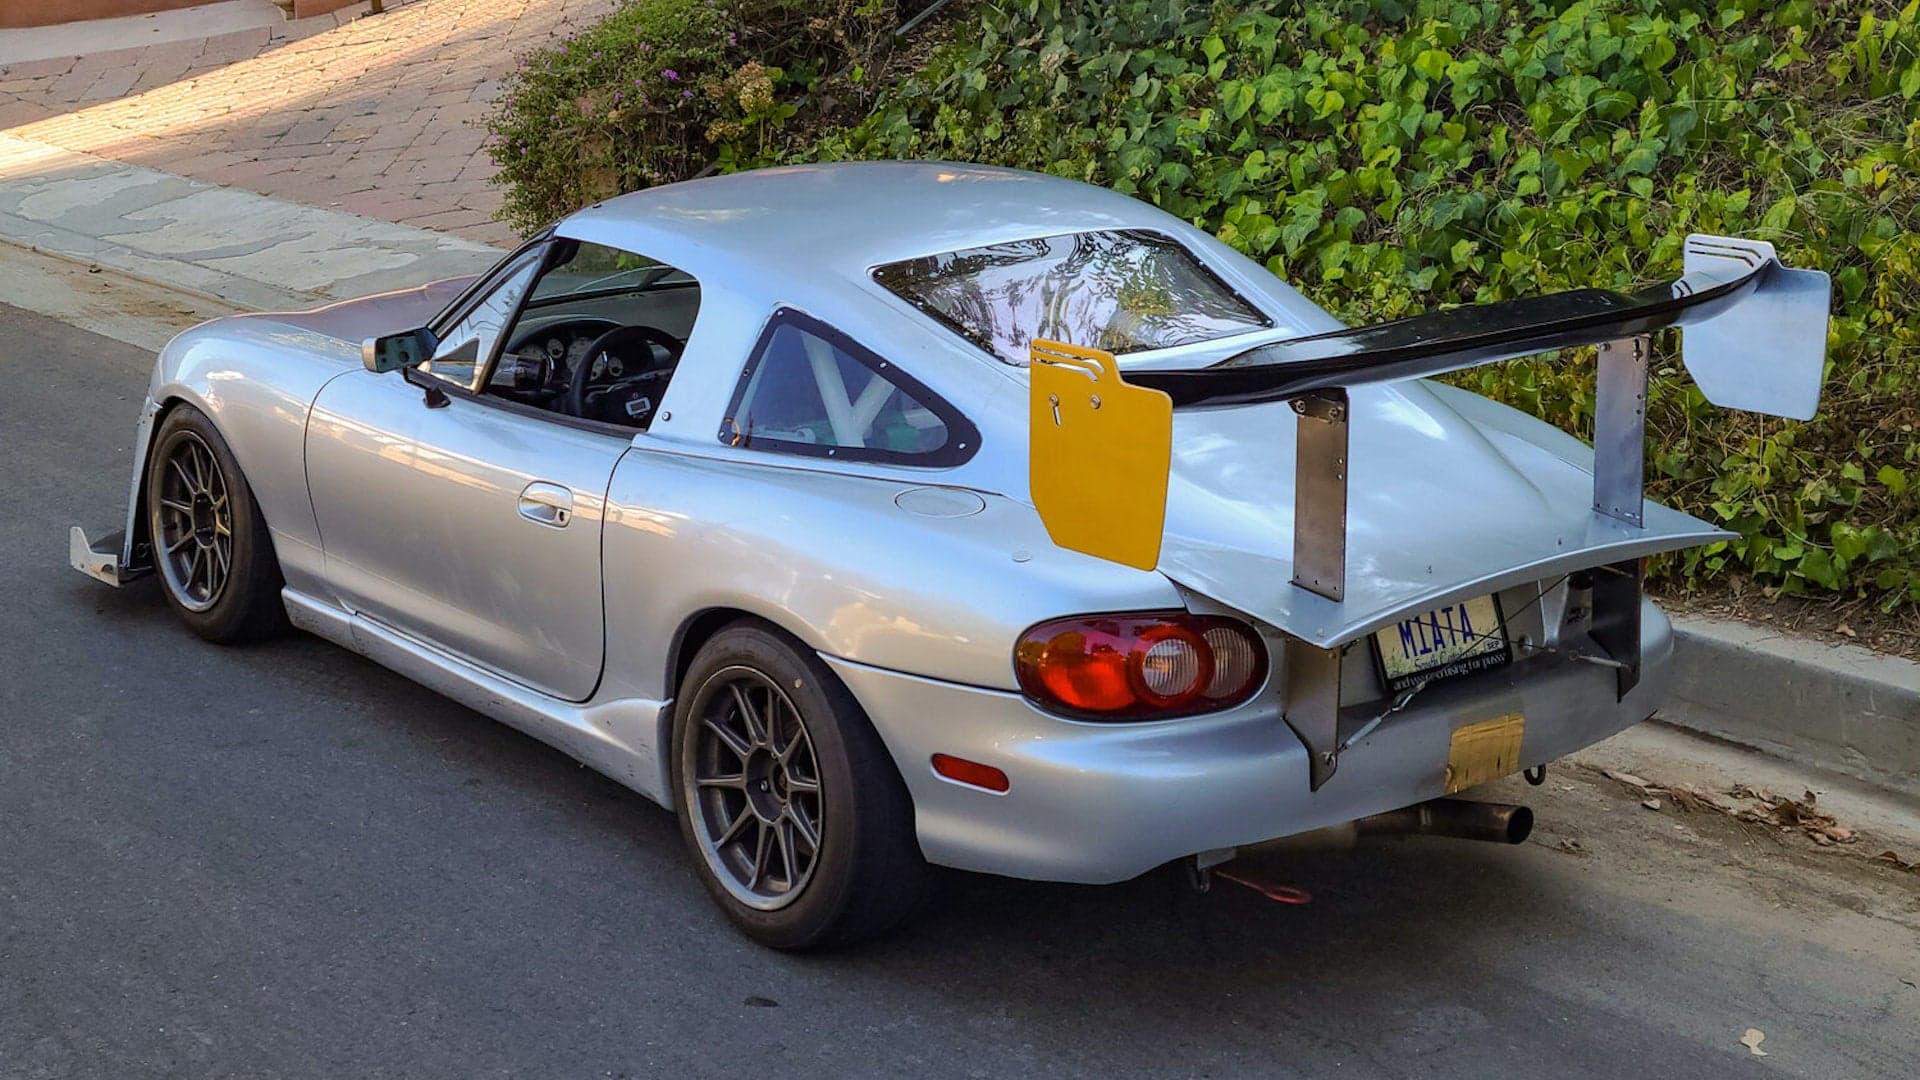 Buy This Longtail Fastback Top and Make Your Mazda Miata Look Like a Le Mans Racer